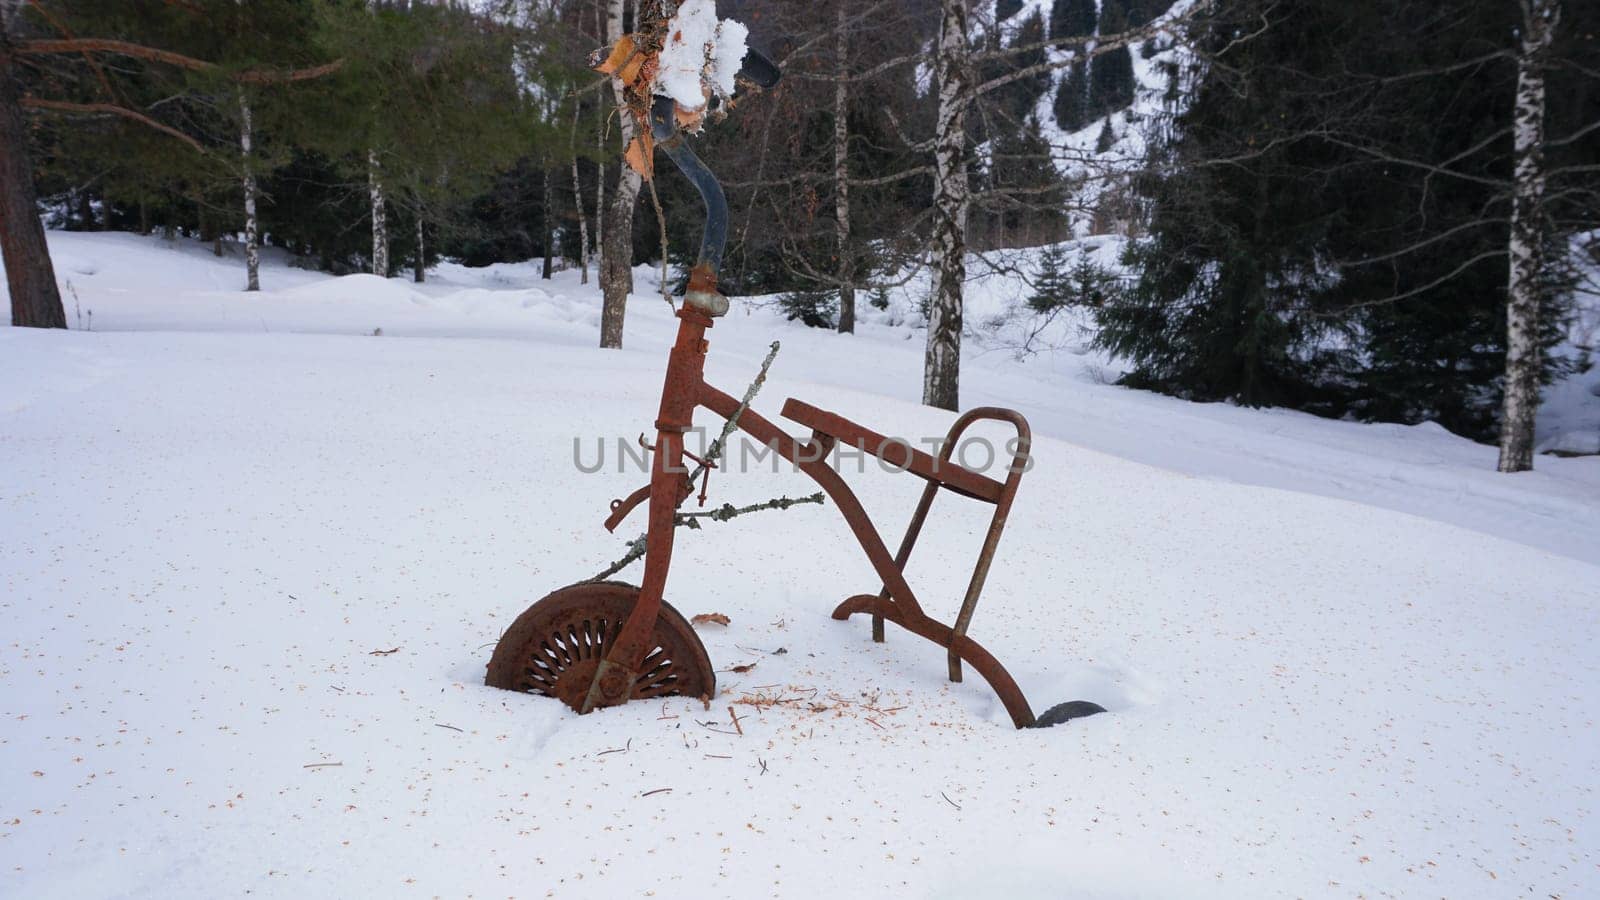 An old rusty tricycle in the winter forest. White snow, coniferous trees. An abandoned place. Branches hang on the steering wheel and wheels. There are husks on the snow from the trees